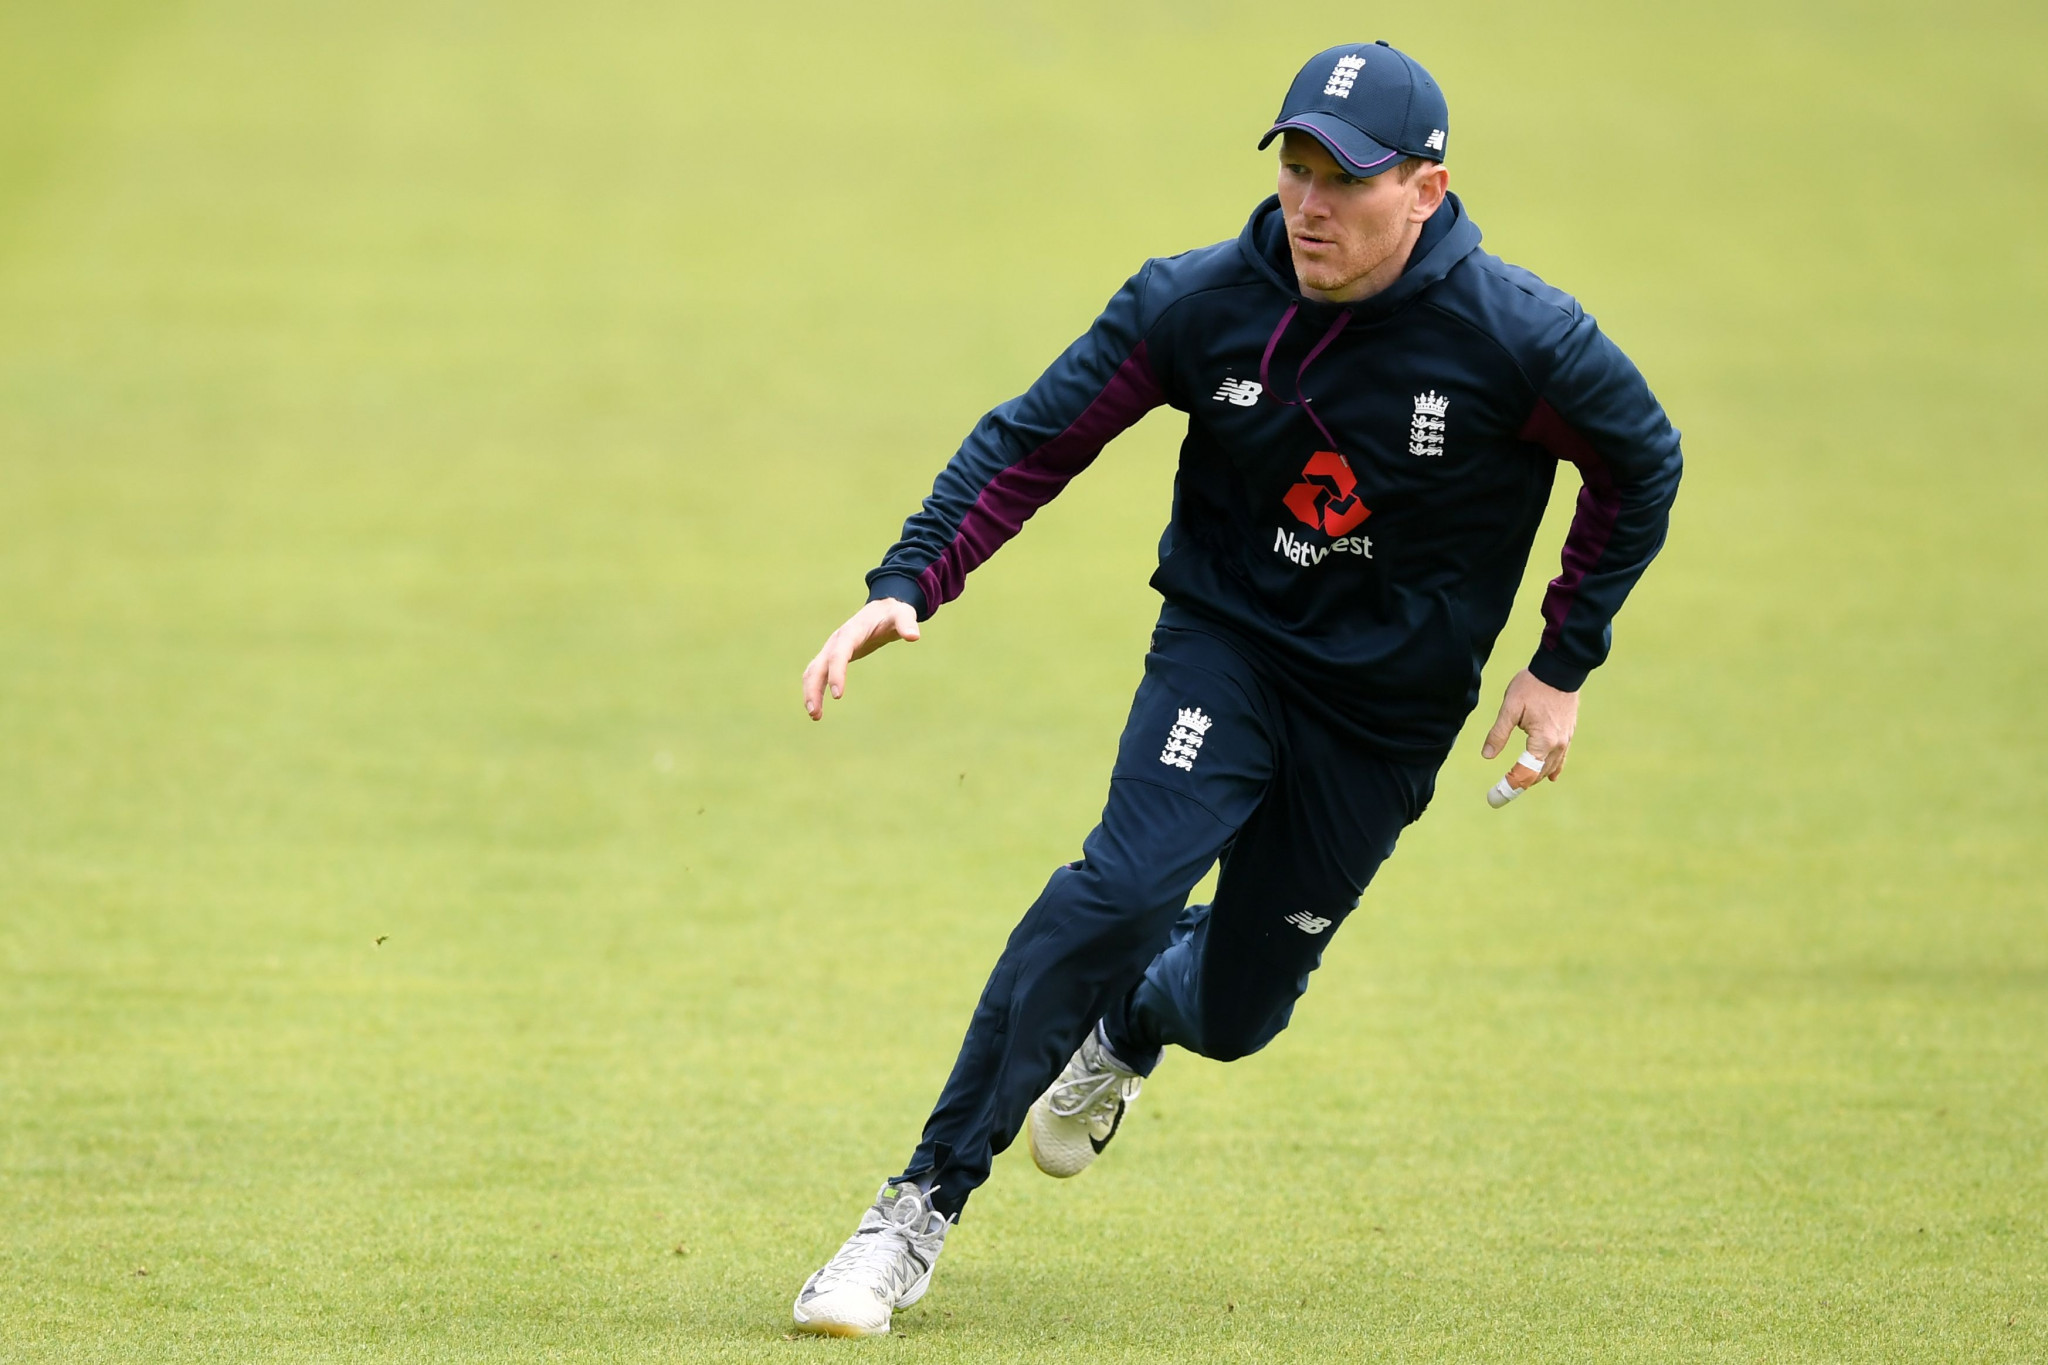 England relishing favourites tag as ICC Cricket World Cup hosts aim for first title